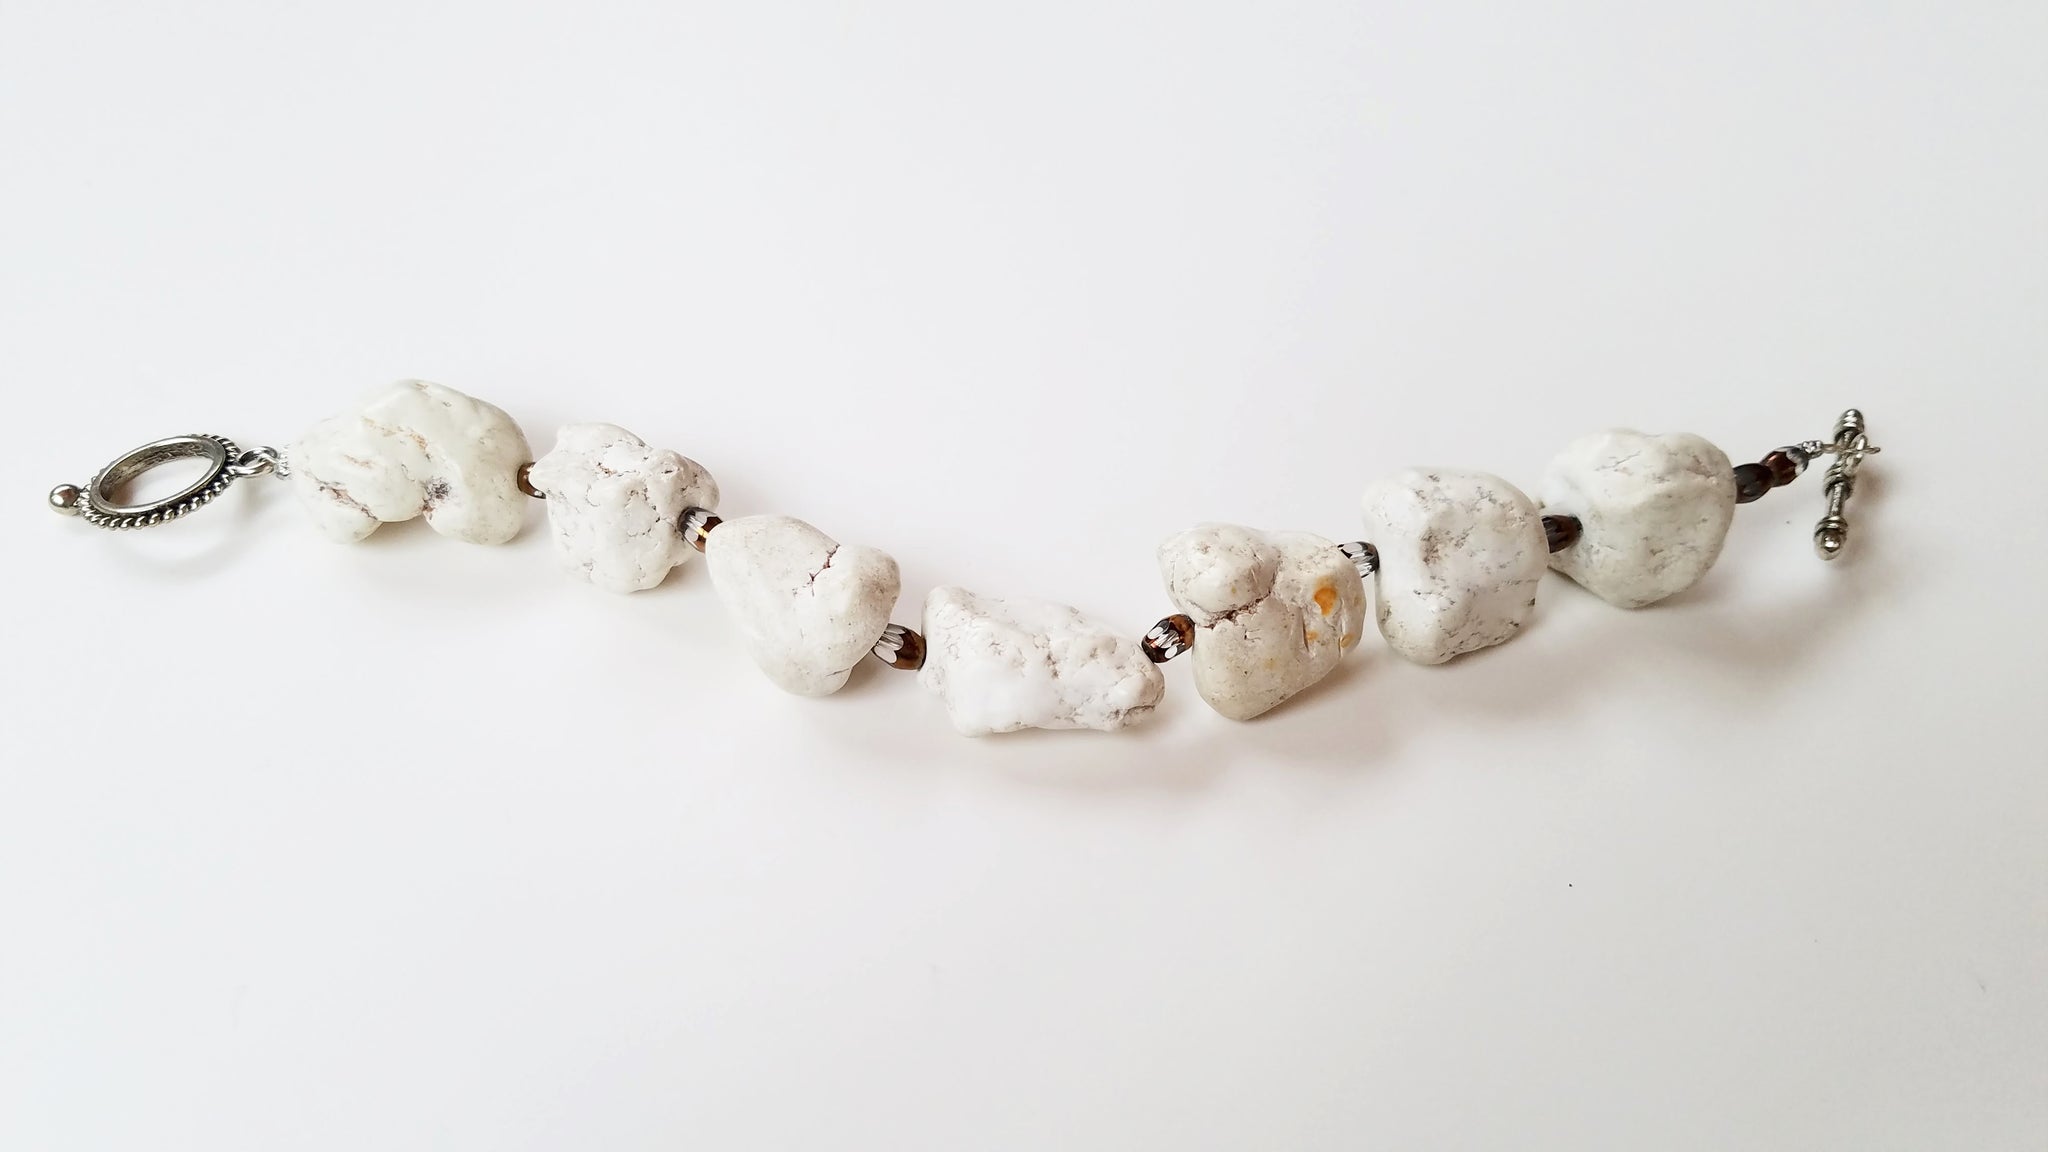 Moon Craters Large Stone Bracelet - Only 1!